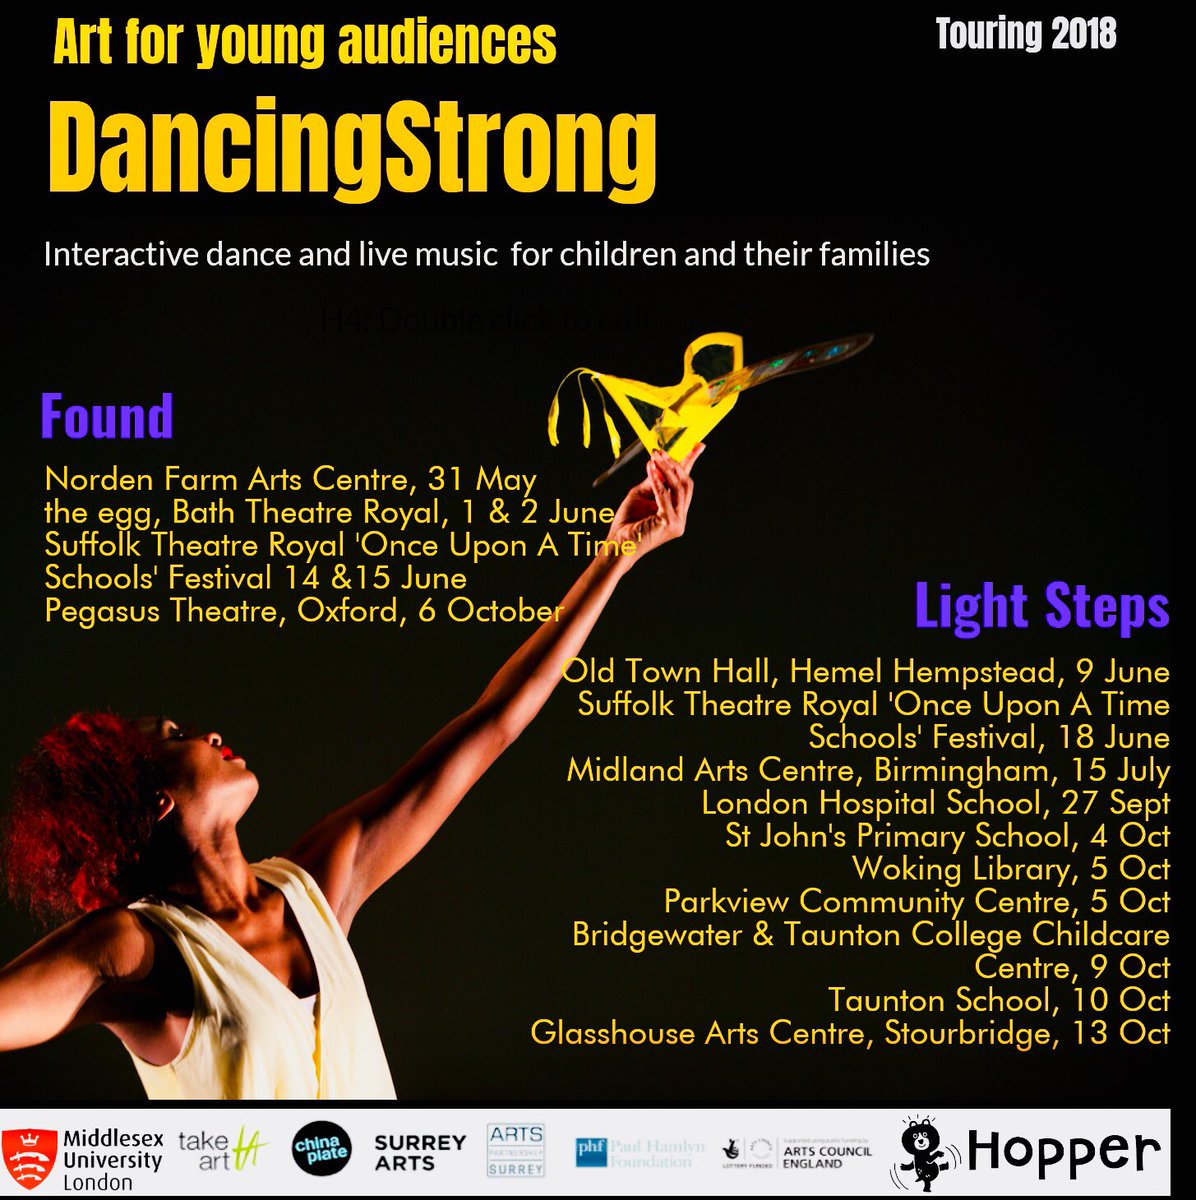 New season touring for our early year’s works. Looking forward to taking in a mix of settings from theatres to schools via @TakeArtDance & friends #found #lightsteps #HopperEY #familyarts #earlyyearsdance #fantasticforfamilies #interactivedance #livemusic #youngadventurers